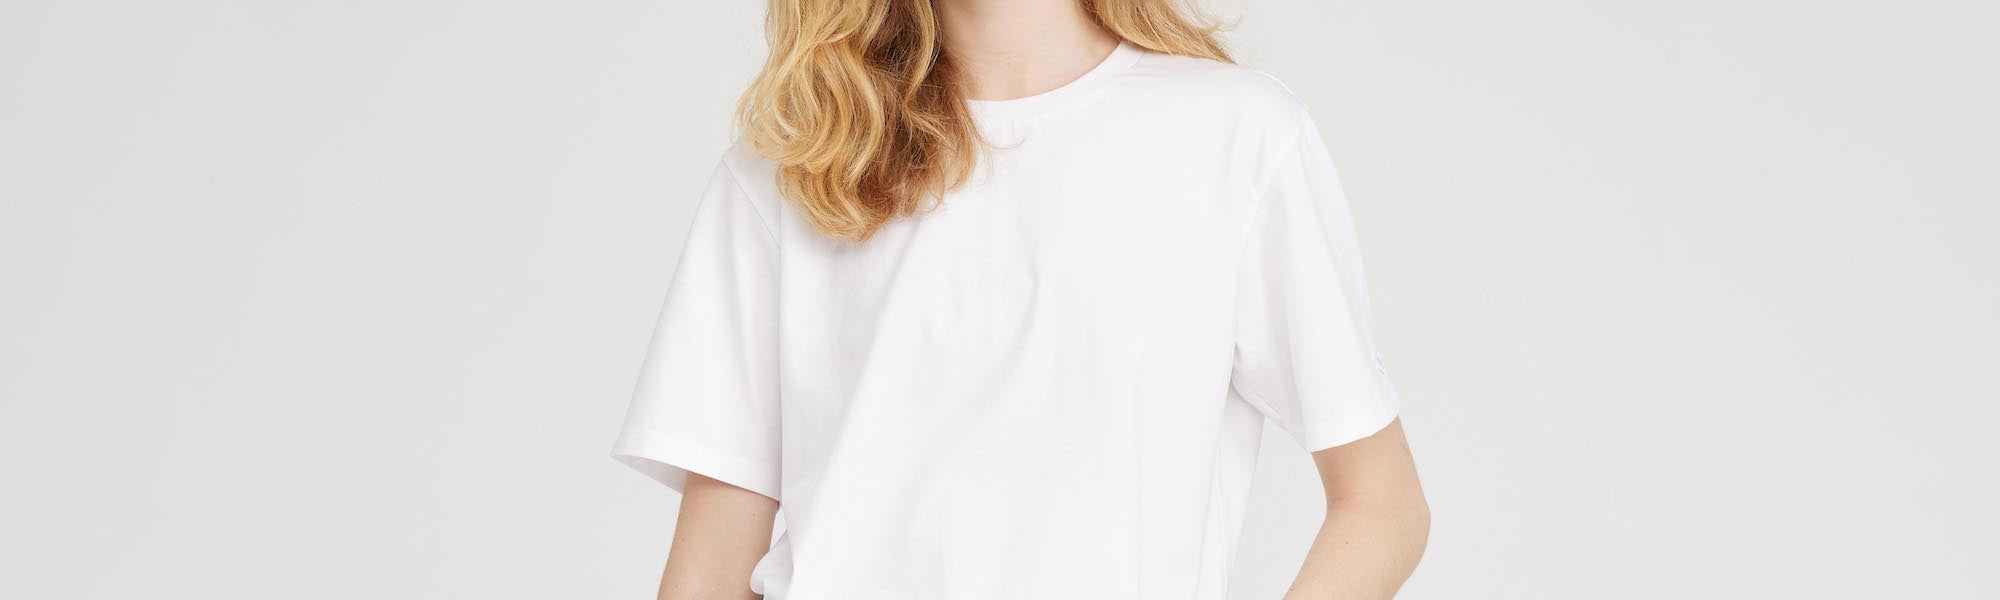 T-shirts and tops from LAURIE | Perfect tops for women